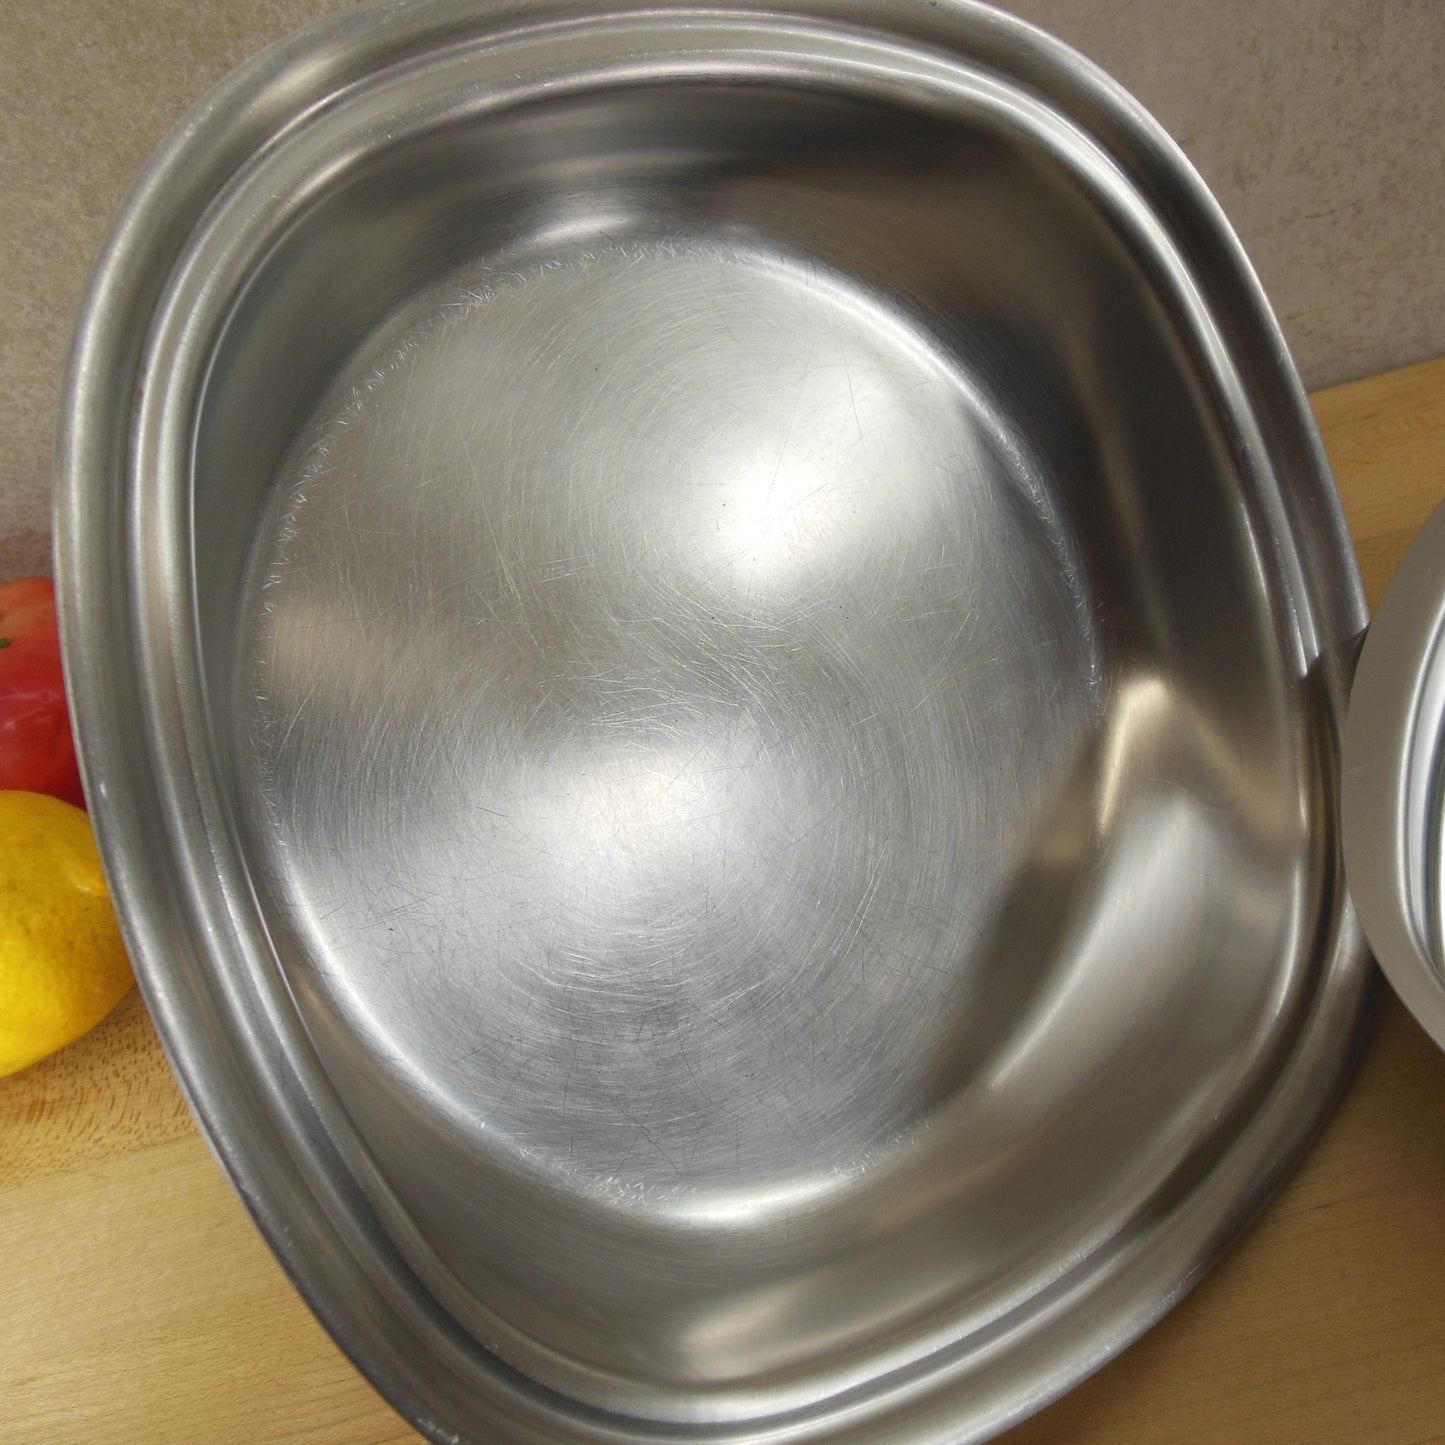 Aristo-Craft West Bend 9.75" Stainless Fry Pan Skillet & Lid used